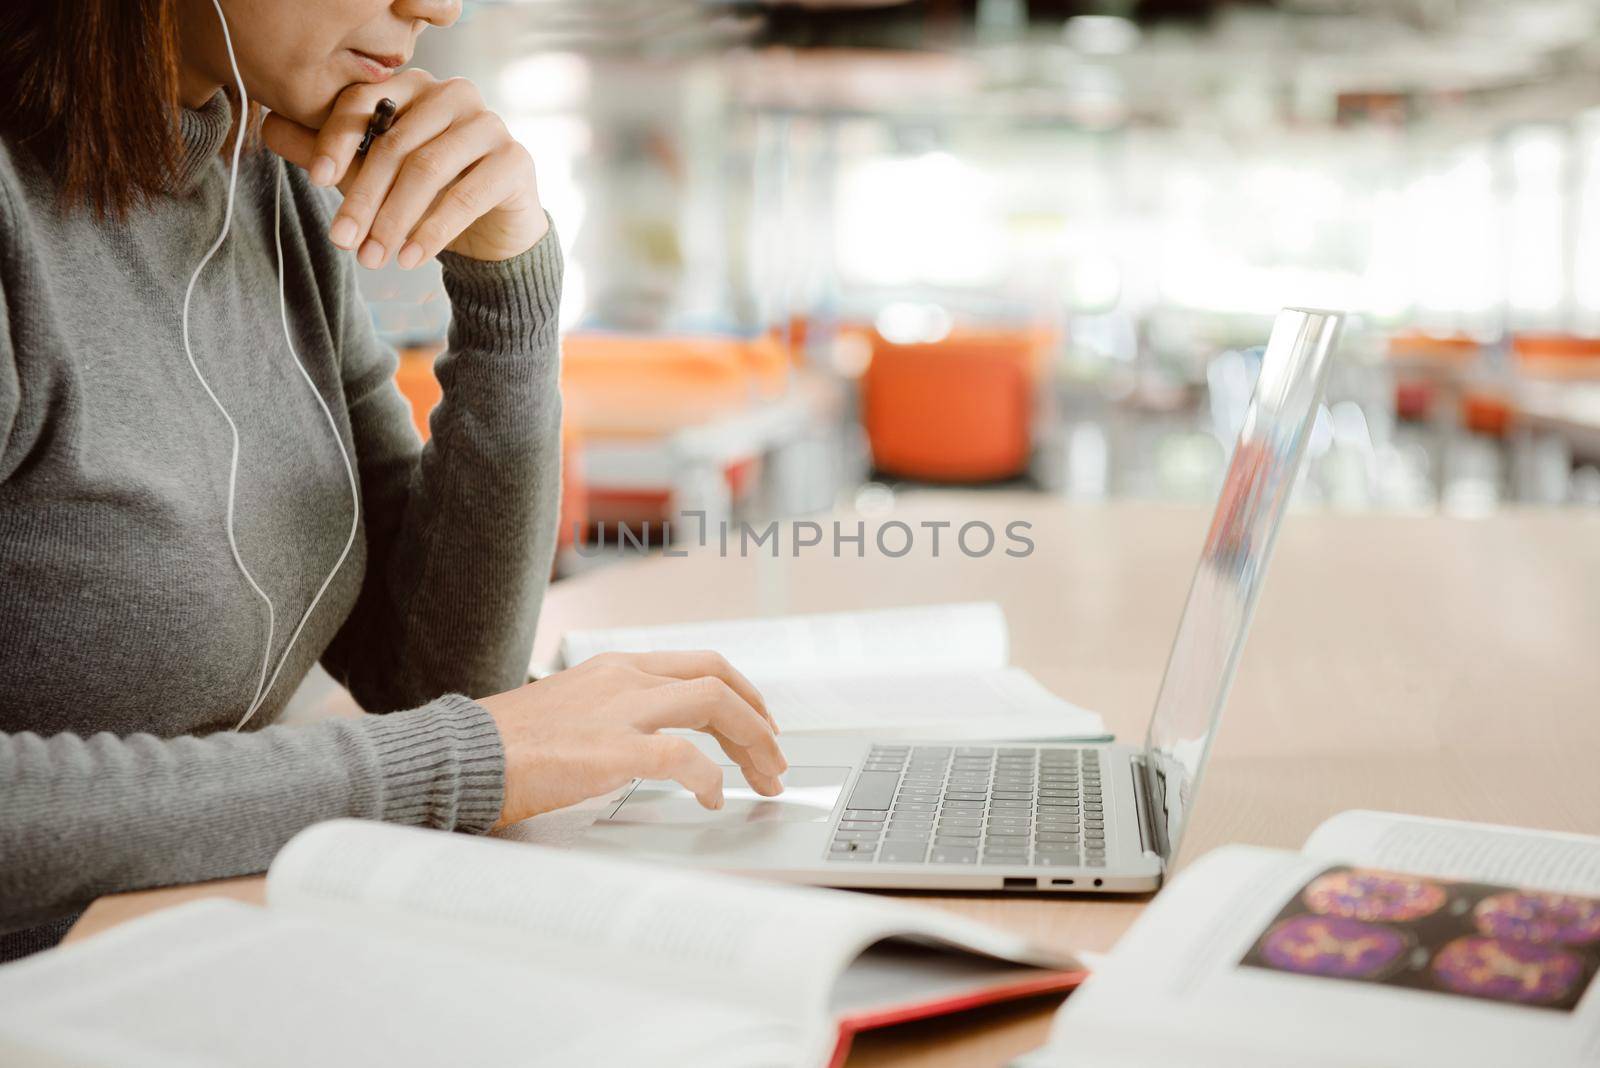 A girl student with headphones preparing for examination and using laptop while sitting at table at university library.